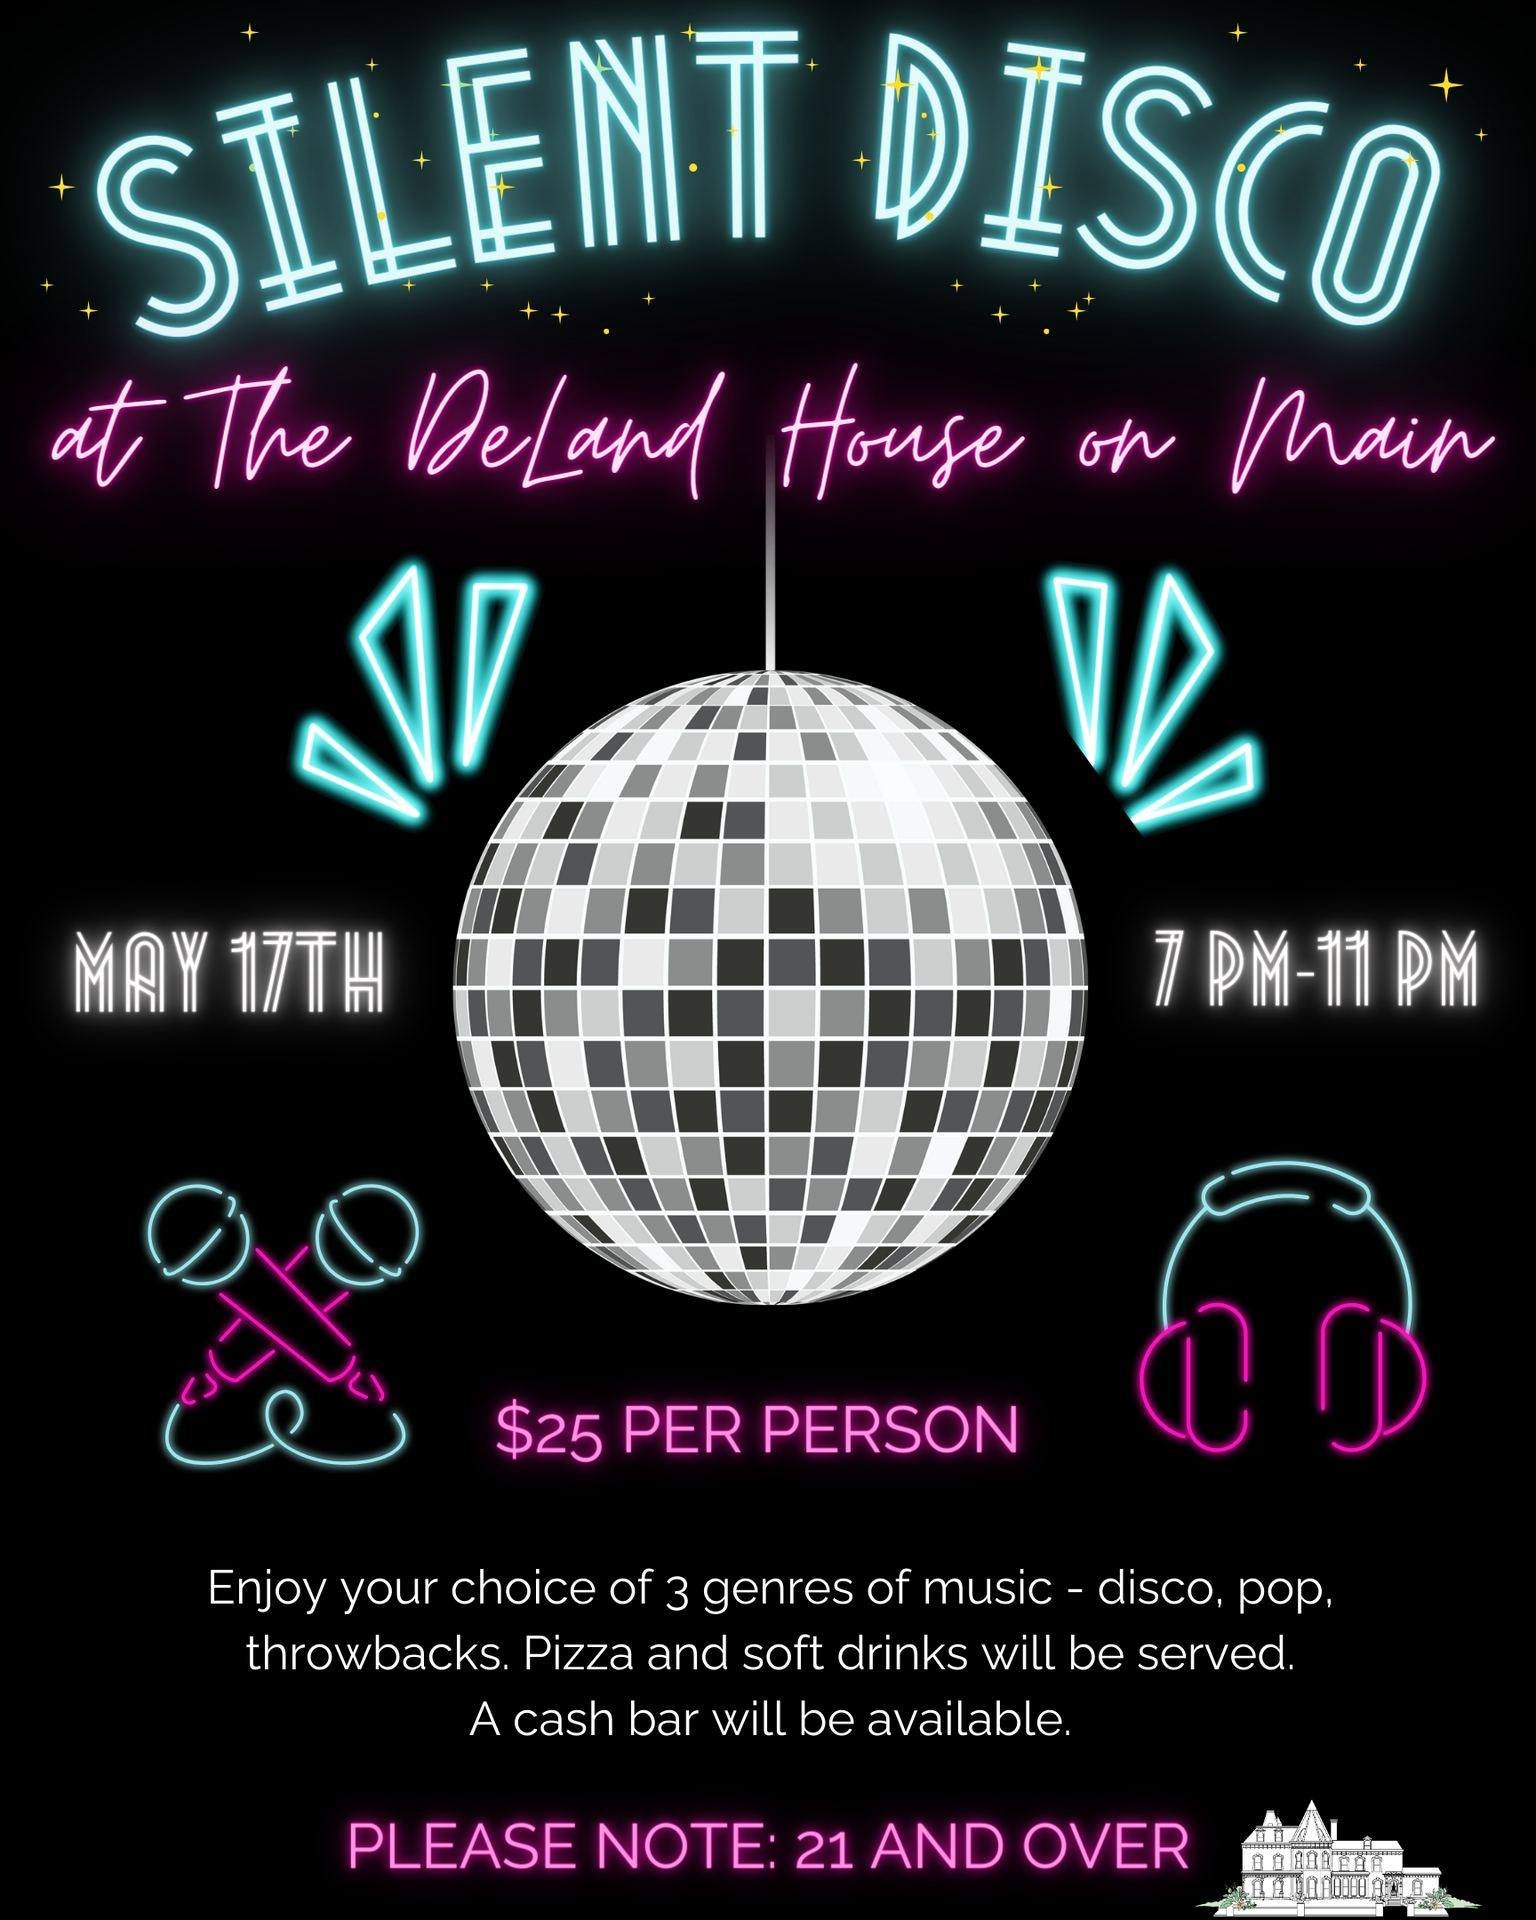 Book your tickets for the Silent Disco at The DeLand House on Main with the link in our bio (also provided below)! 🕺🪩💃🏼 

Come and dance the night away on May 17th from 7pm-11pm. Choose between 3 different channels: disco, modern pop, and throwba